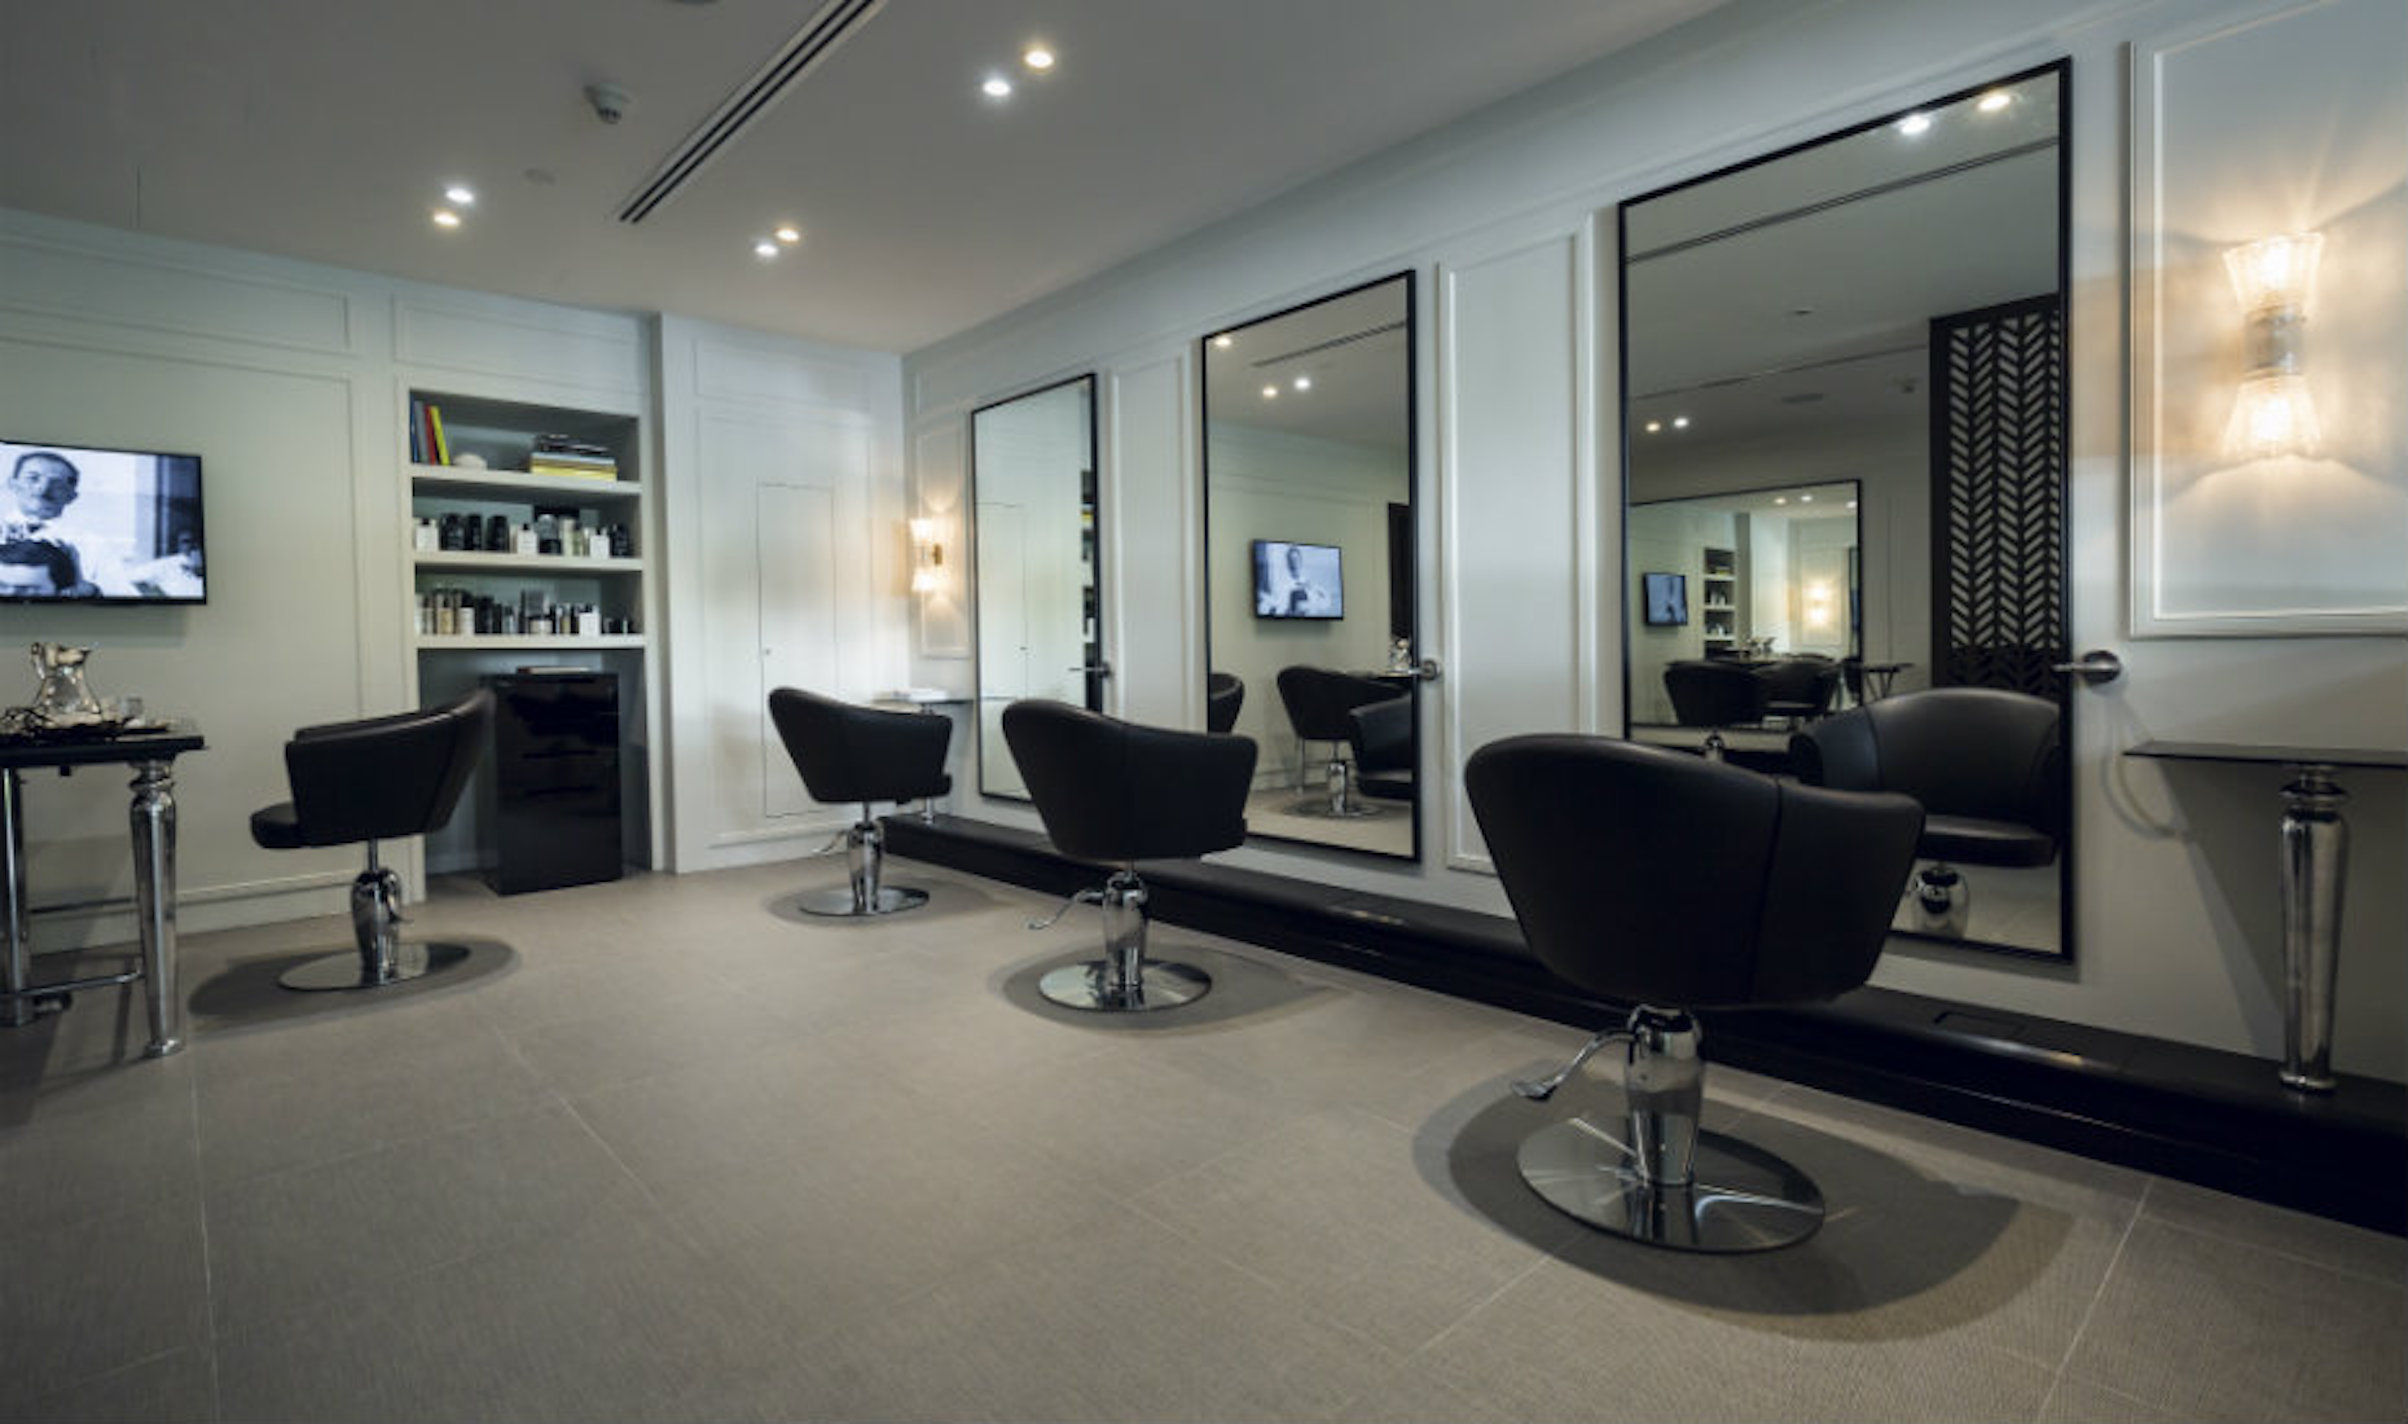 Mane attraction: Luxury hair salons in Singapore for quality cuts and treatments